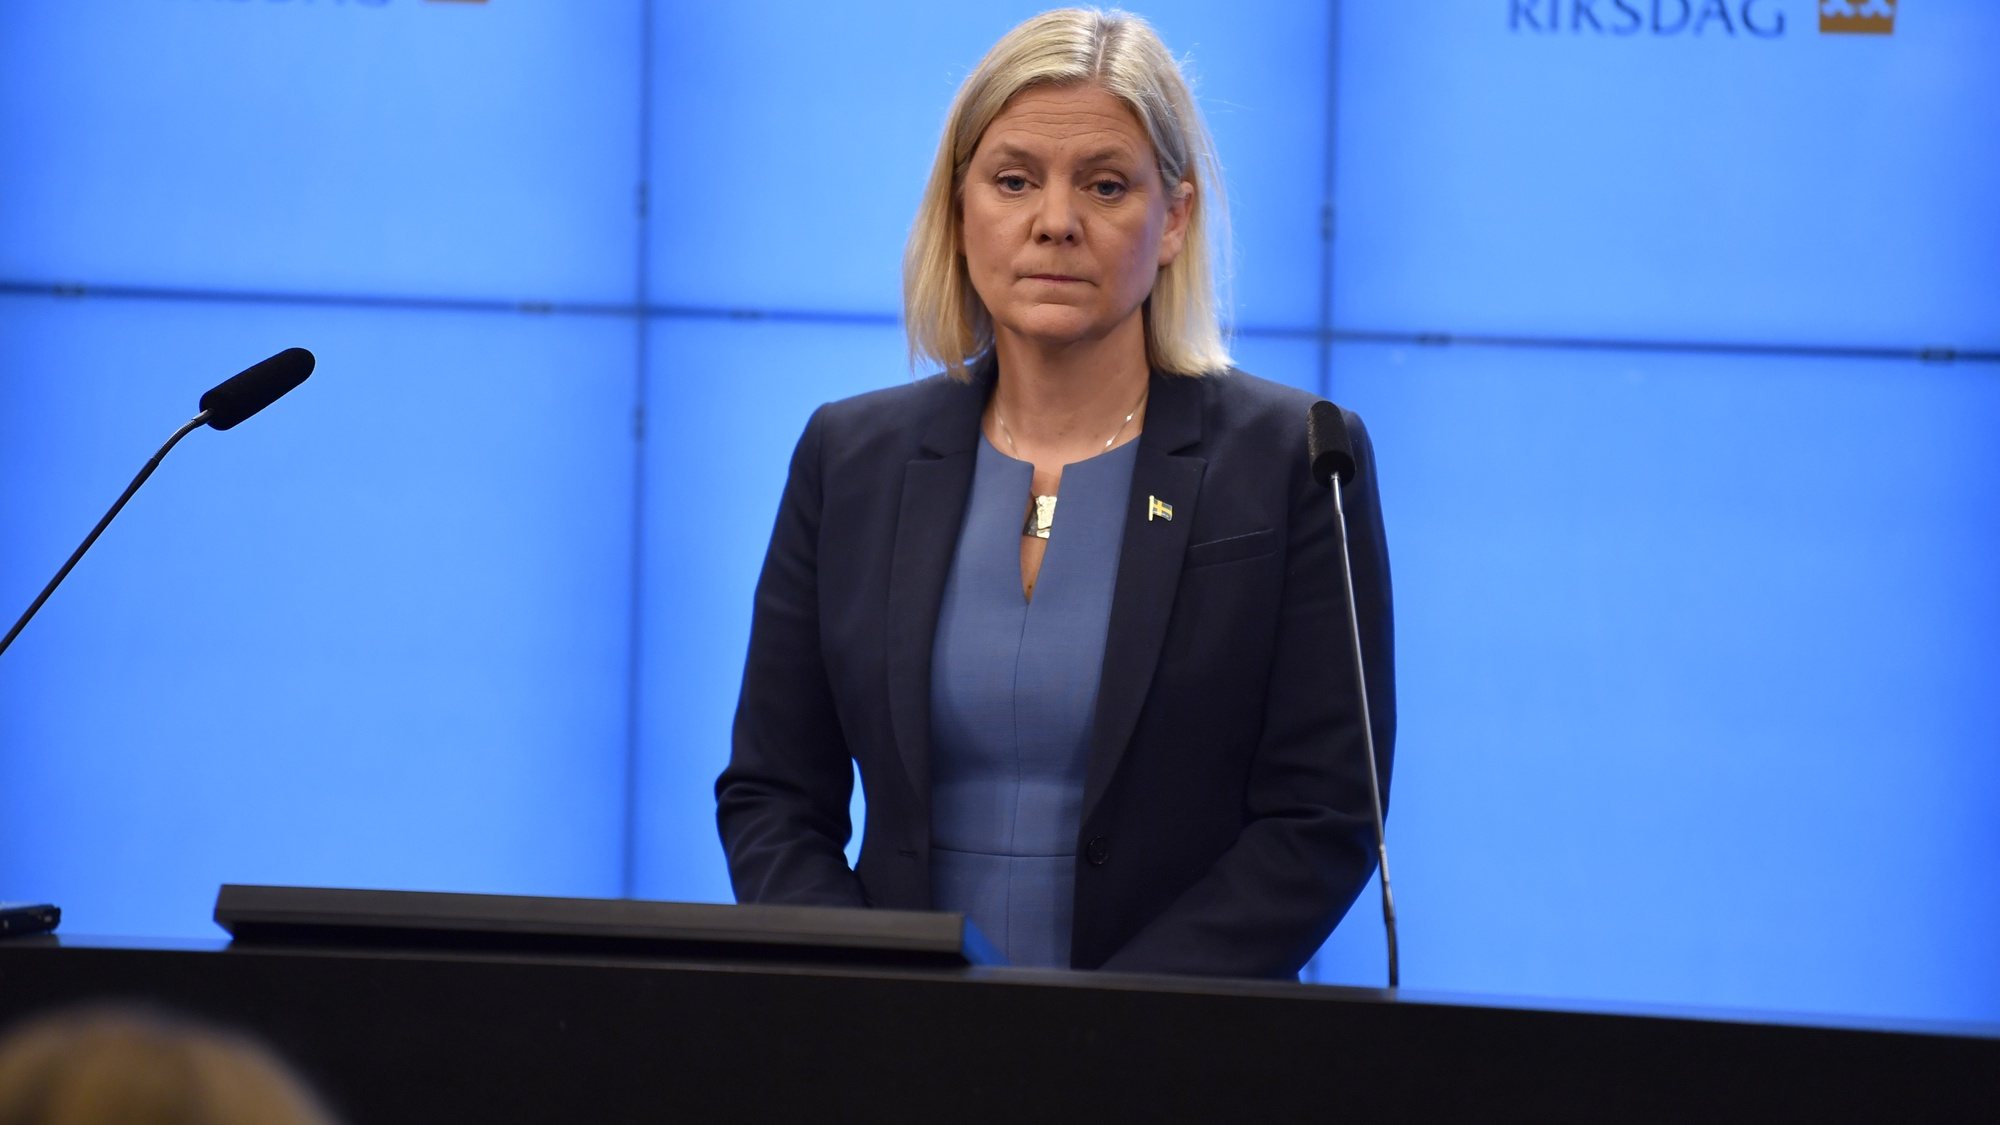 A primeia-ministra Magdalena Andersson